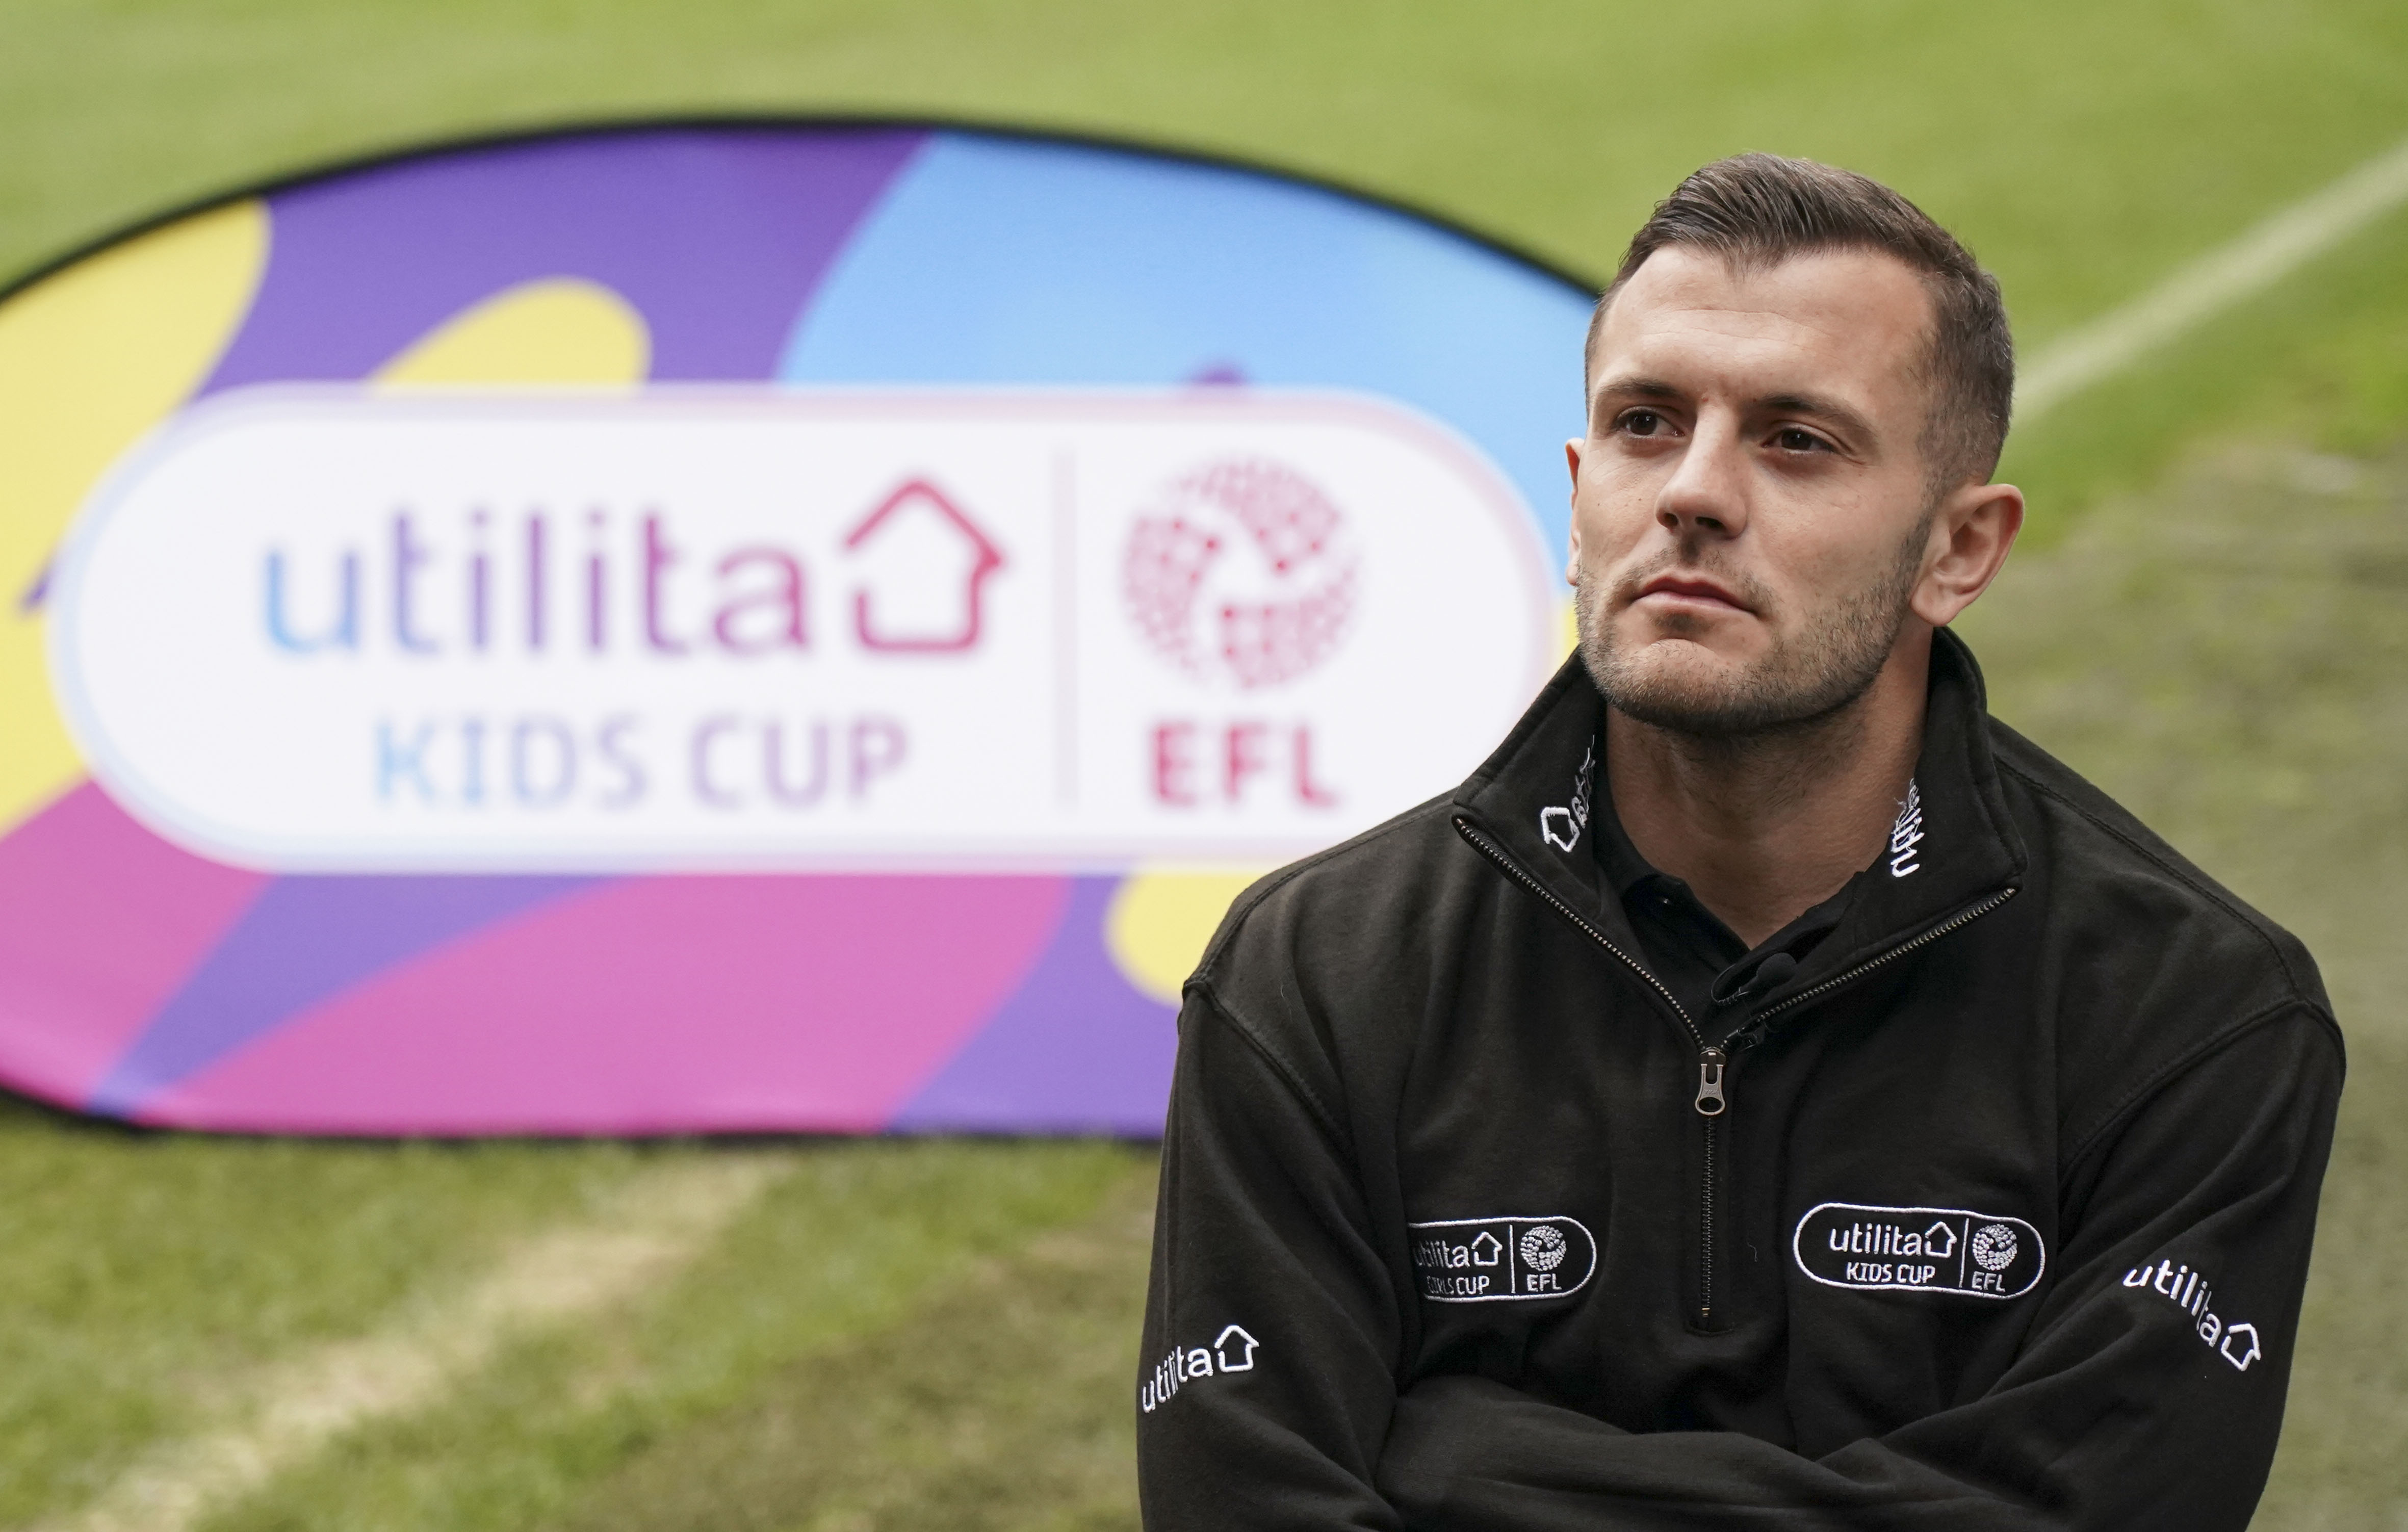 On the pitch at The Valley, home of Charlton Athletic, former Arsenal FC player Jack Wilshere, and former Birmingham, Chelsea and England player Karen Carney help to launch the Utilita Kids and Girls Cup with the children from Ealdham Primary School. 